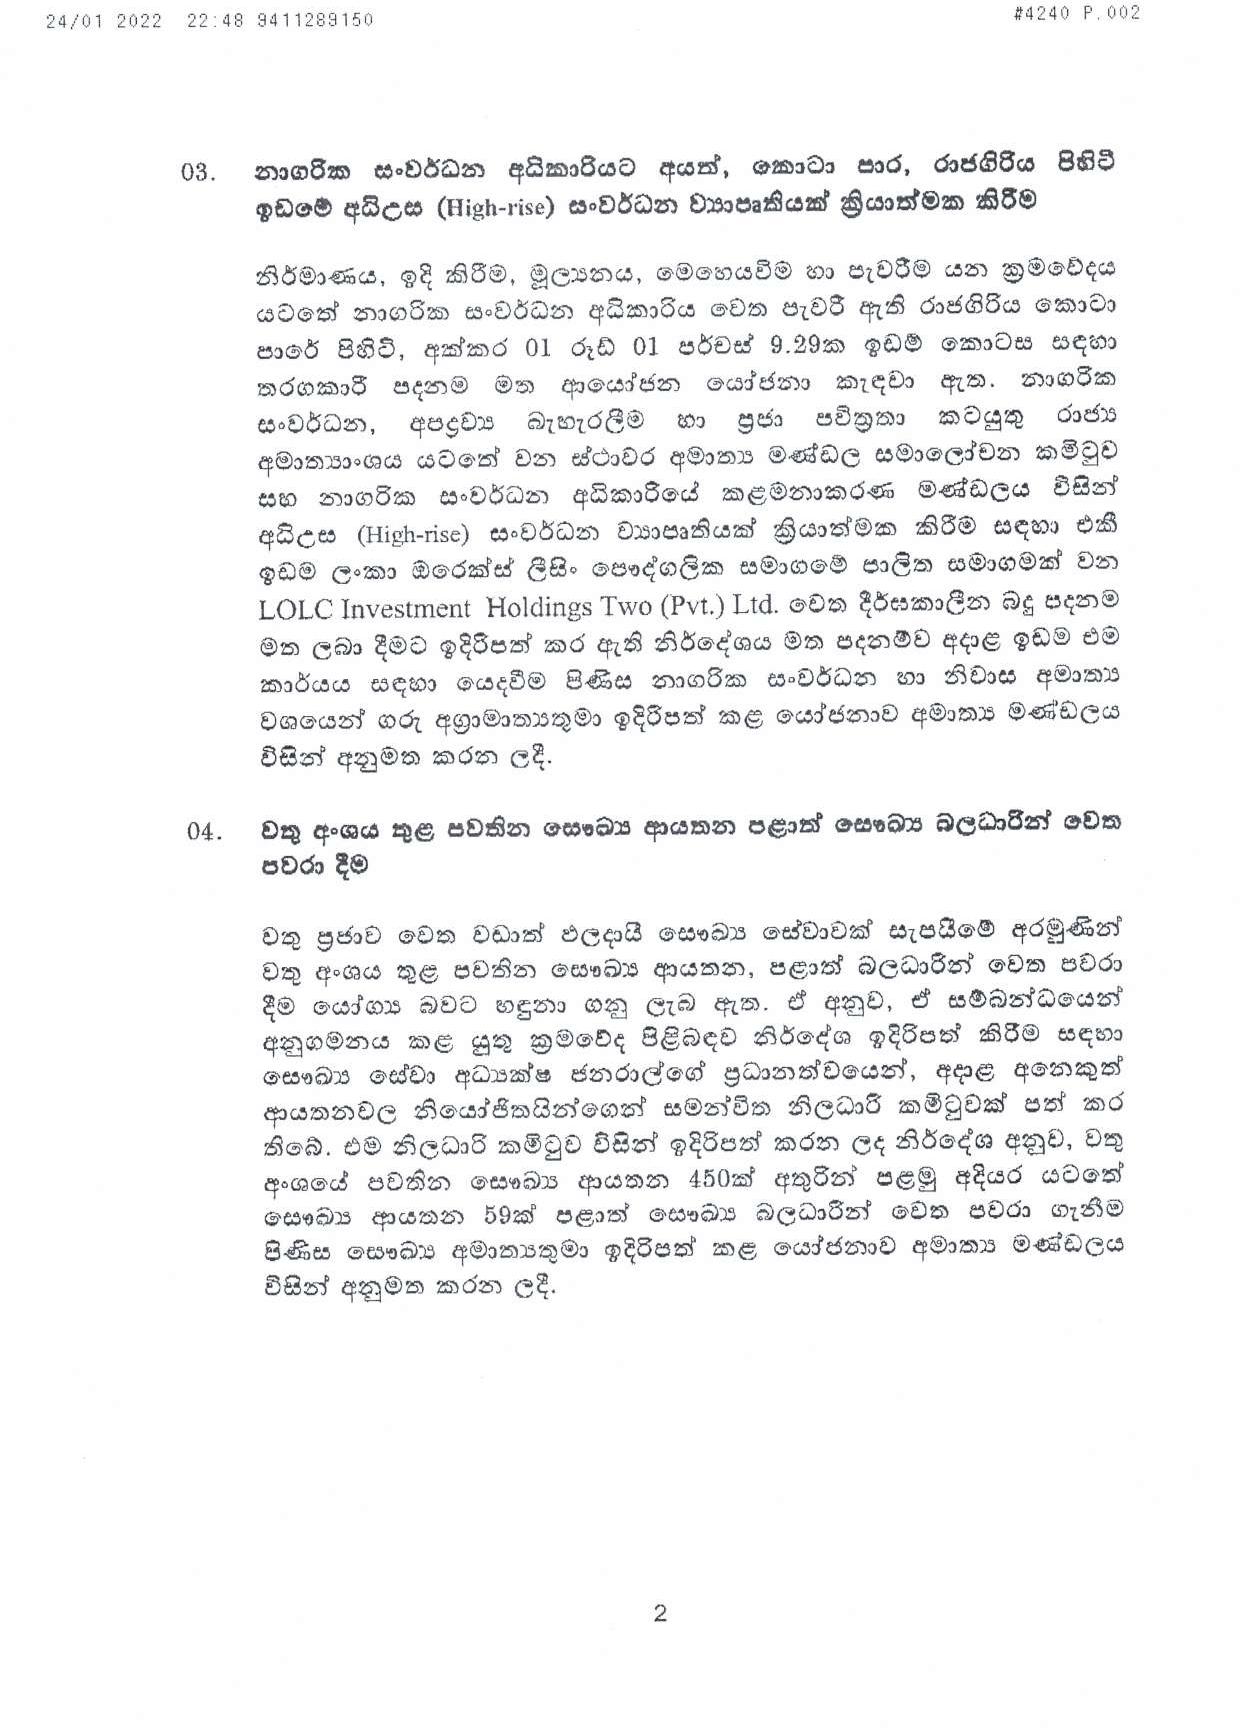 Cabinet Decision on 24.01.2022 page 001